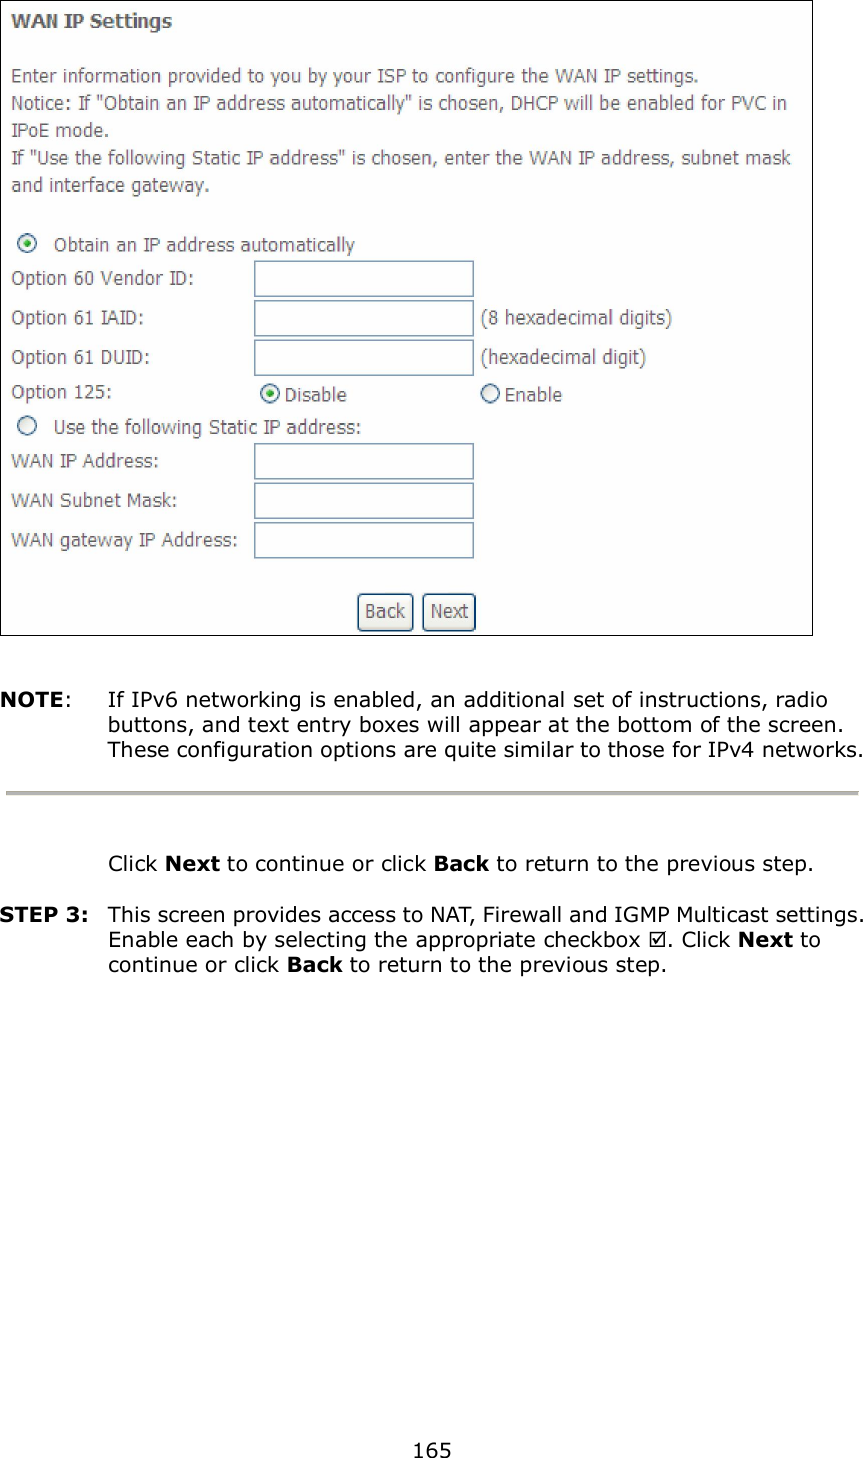  165    NOTE:  If IPv6 networking is enabled, an additional set of instructions, radio buttons, and text entry boxes will appear at the bottom of the screen.   These configuration options are quite similar to those for IPv4 networks.    Click Next to continue or click Back to return to the previous step.  STEP 3:  This screen provides access to NAT, Firewall and IGMP Multicast settings. Enable each by selecting the appropriate checkbox . Click Next to continue or click Back to return to the previous step.  